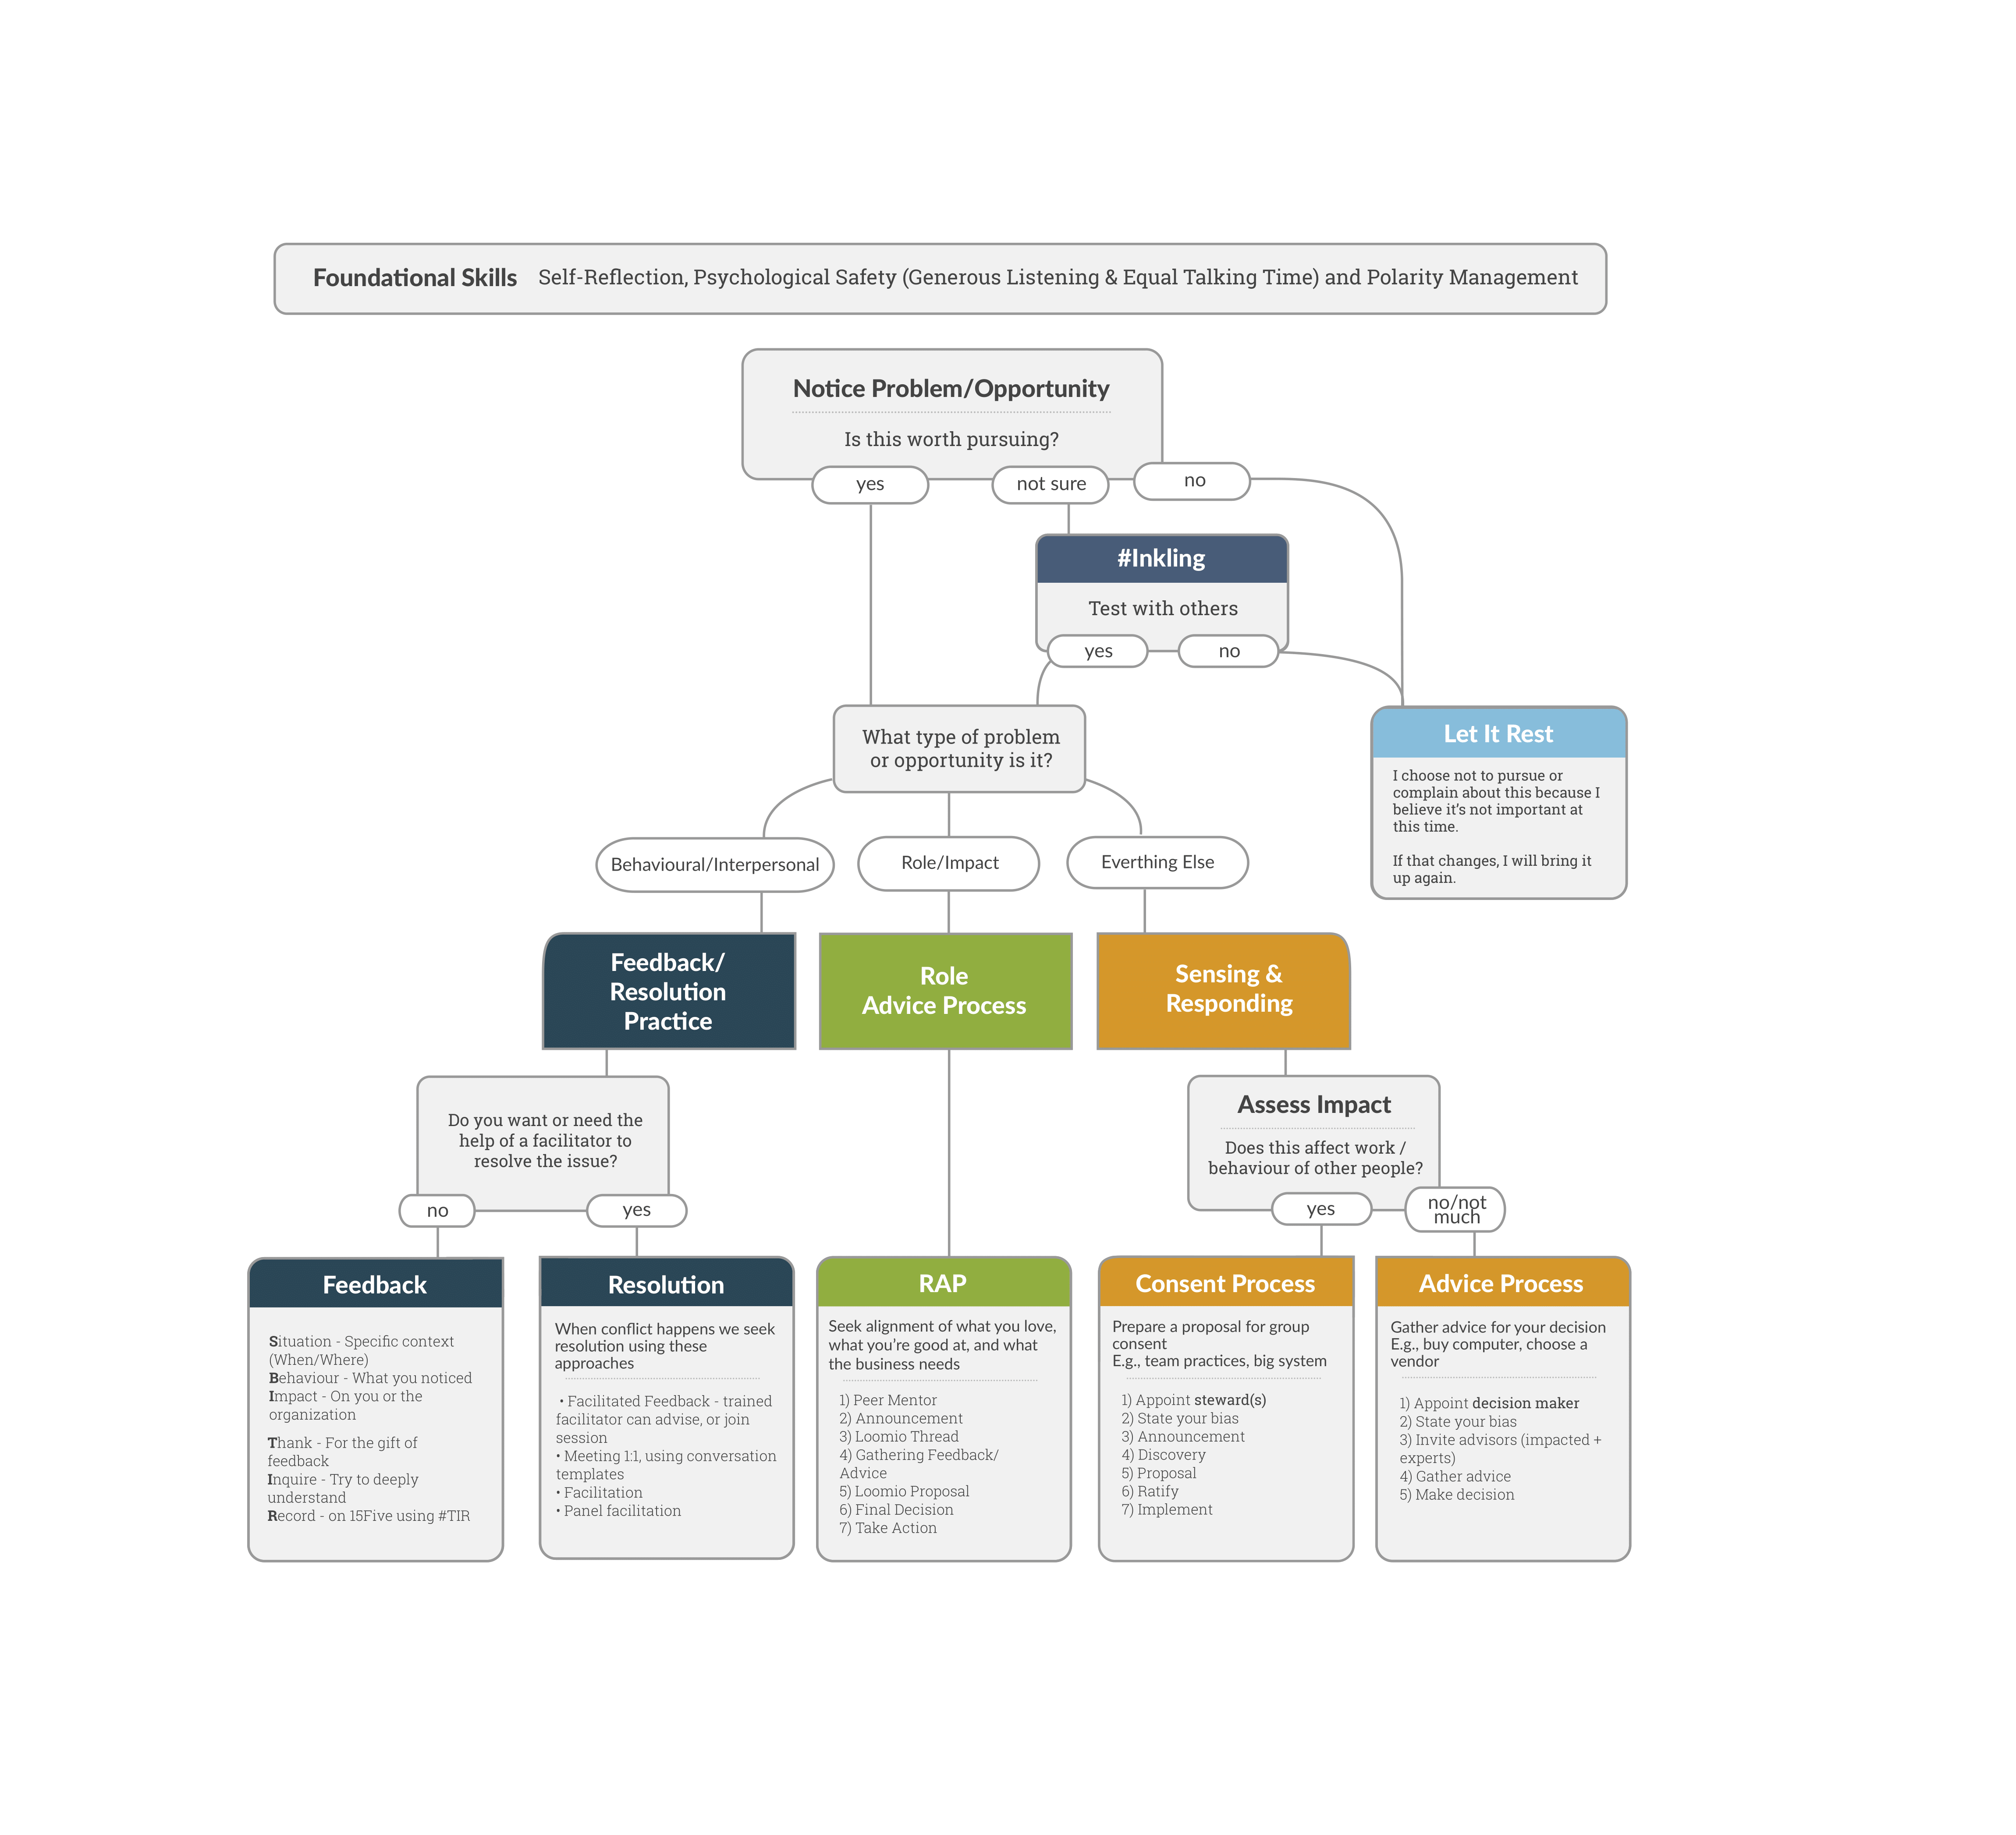 How we operate in 2020 at Ian Martin Group flowchart